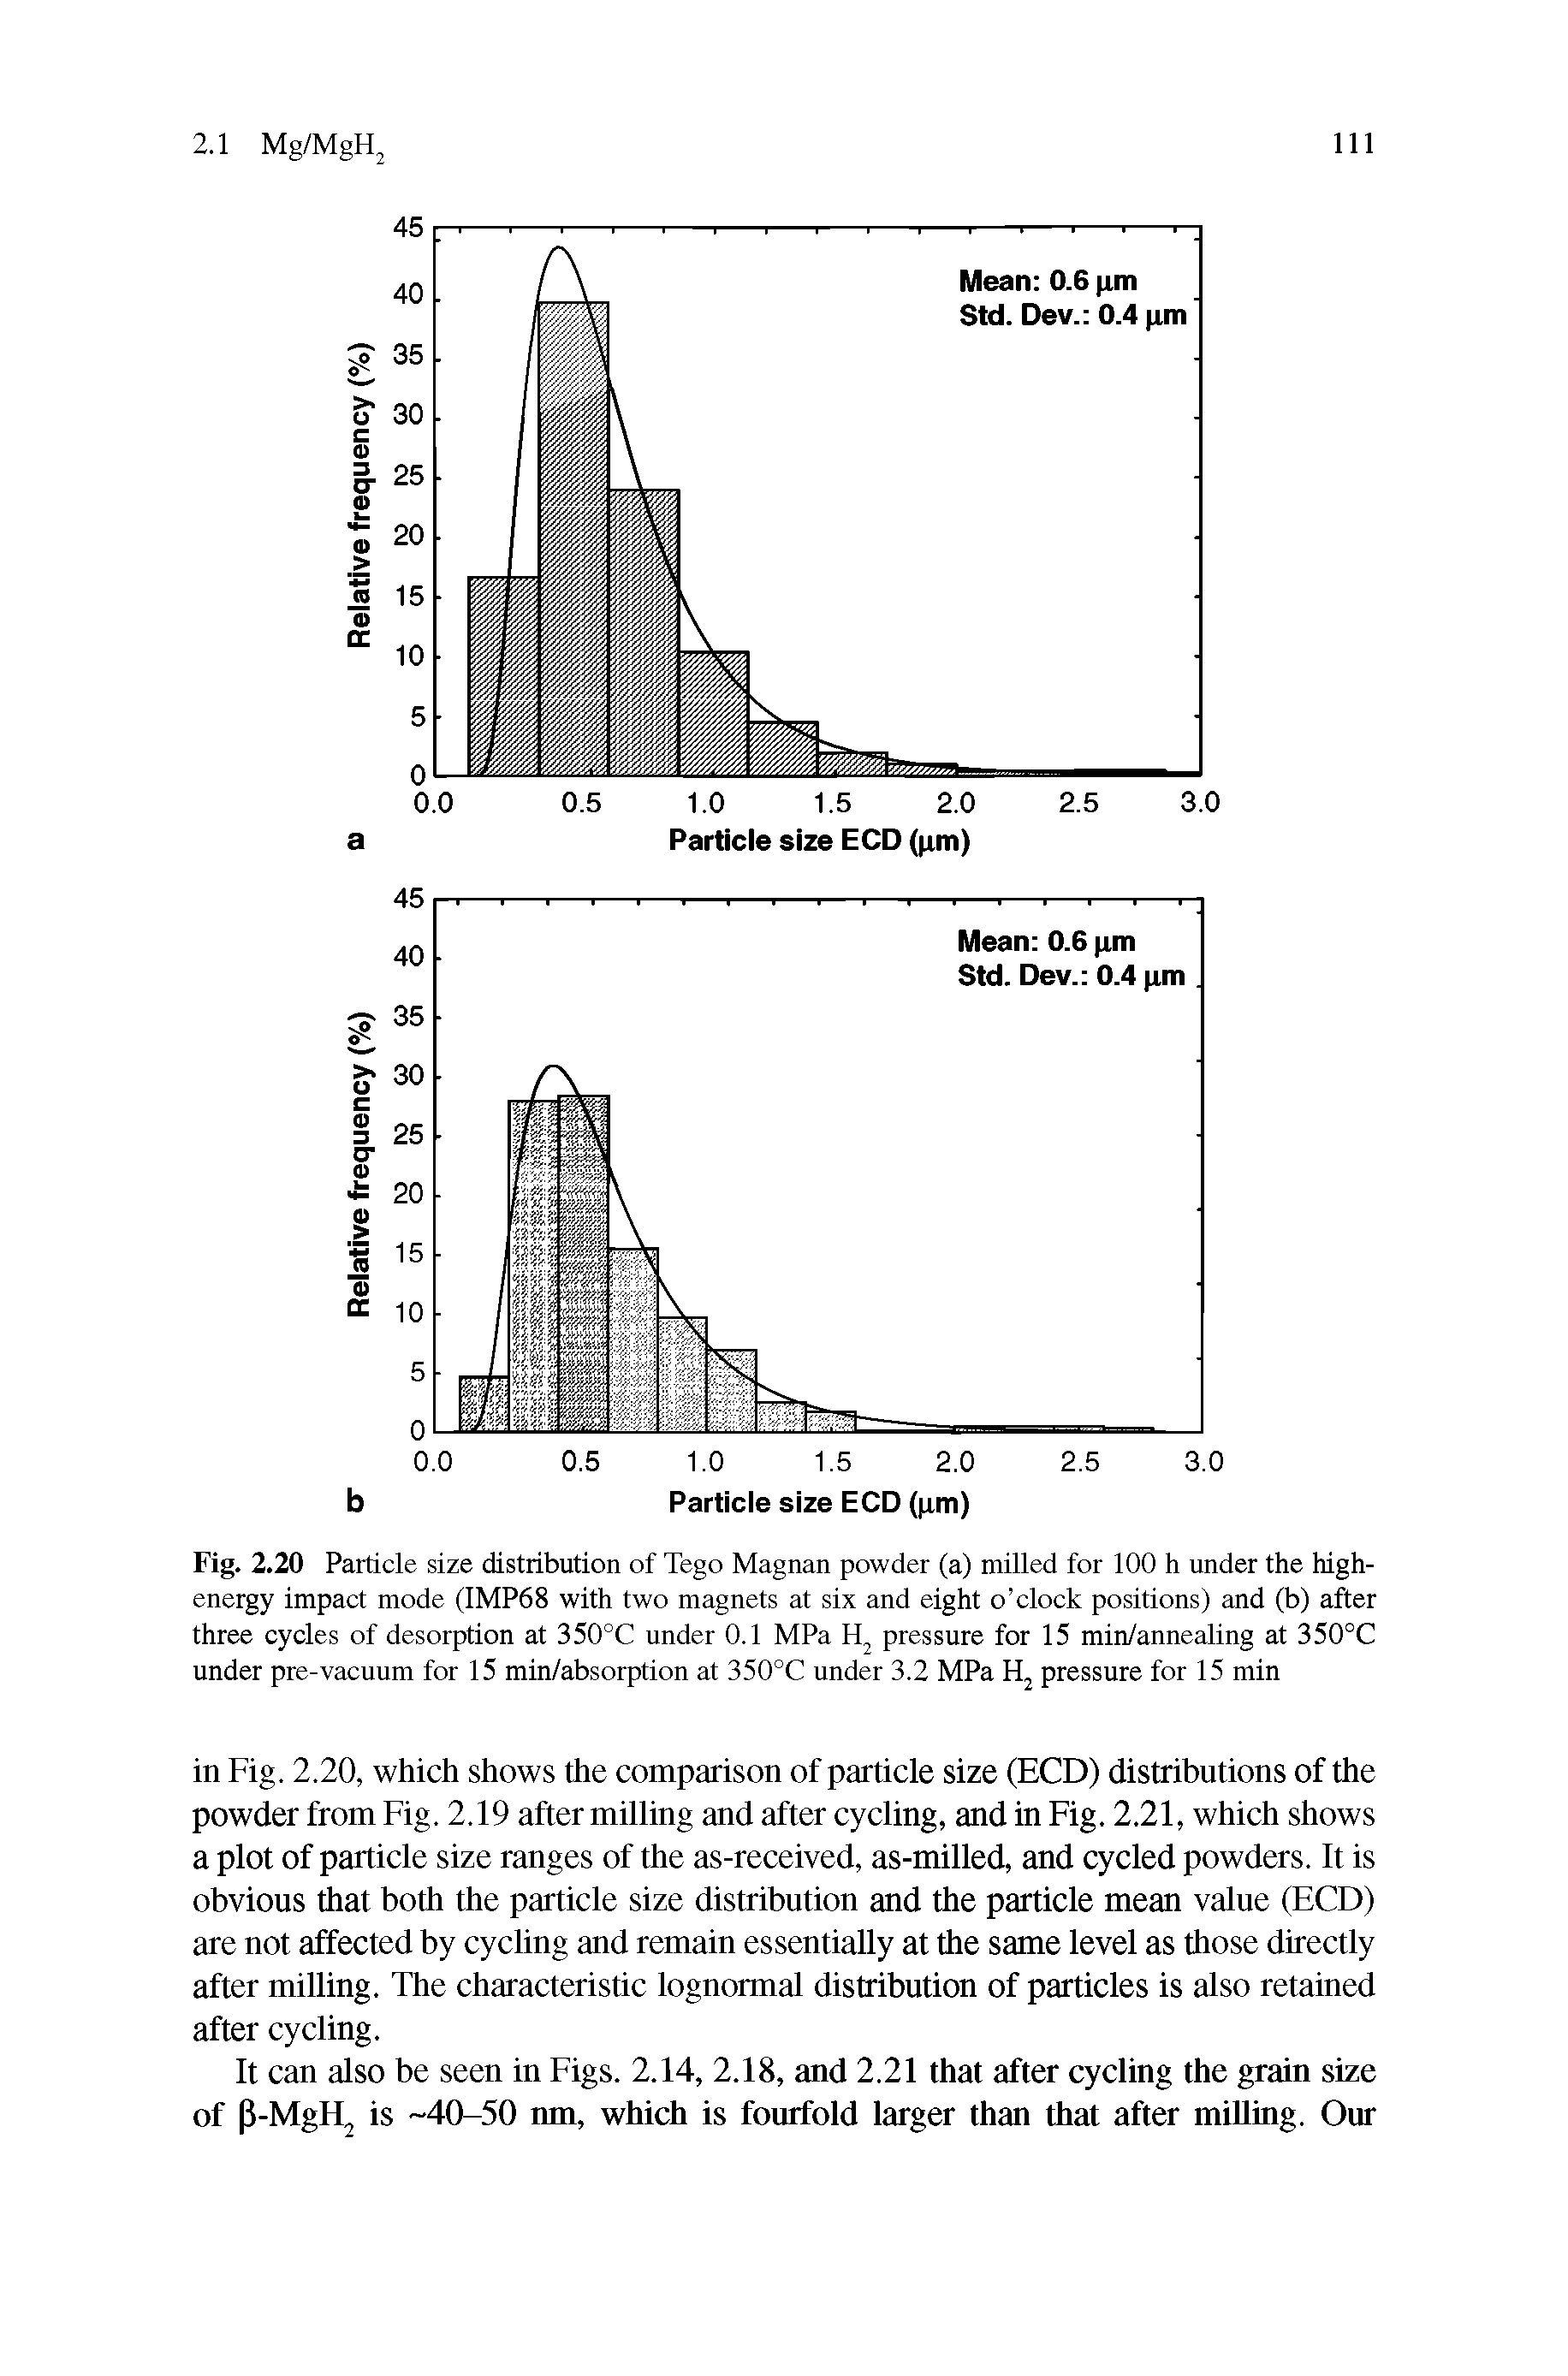 Fig. 2.20 Particle size distribution of Tego Magnan powder (a) milled for 100 h under the high-energy impact mode (IMP68 with two magnets at six and eight o clock positions) and (b) after three cycles of desorption at 350°C under 0.1 MPa pressure for 15 min/annealing at 350°C under pre-vacuum for 15 min/absorption at 350°C under 3.2 MPa Hj pressure for 15 min...